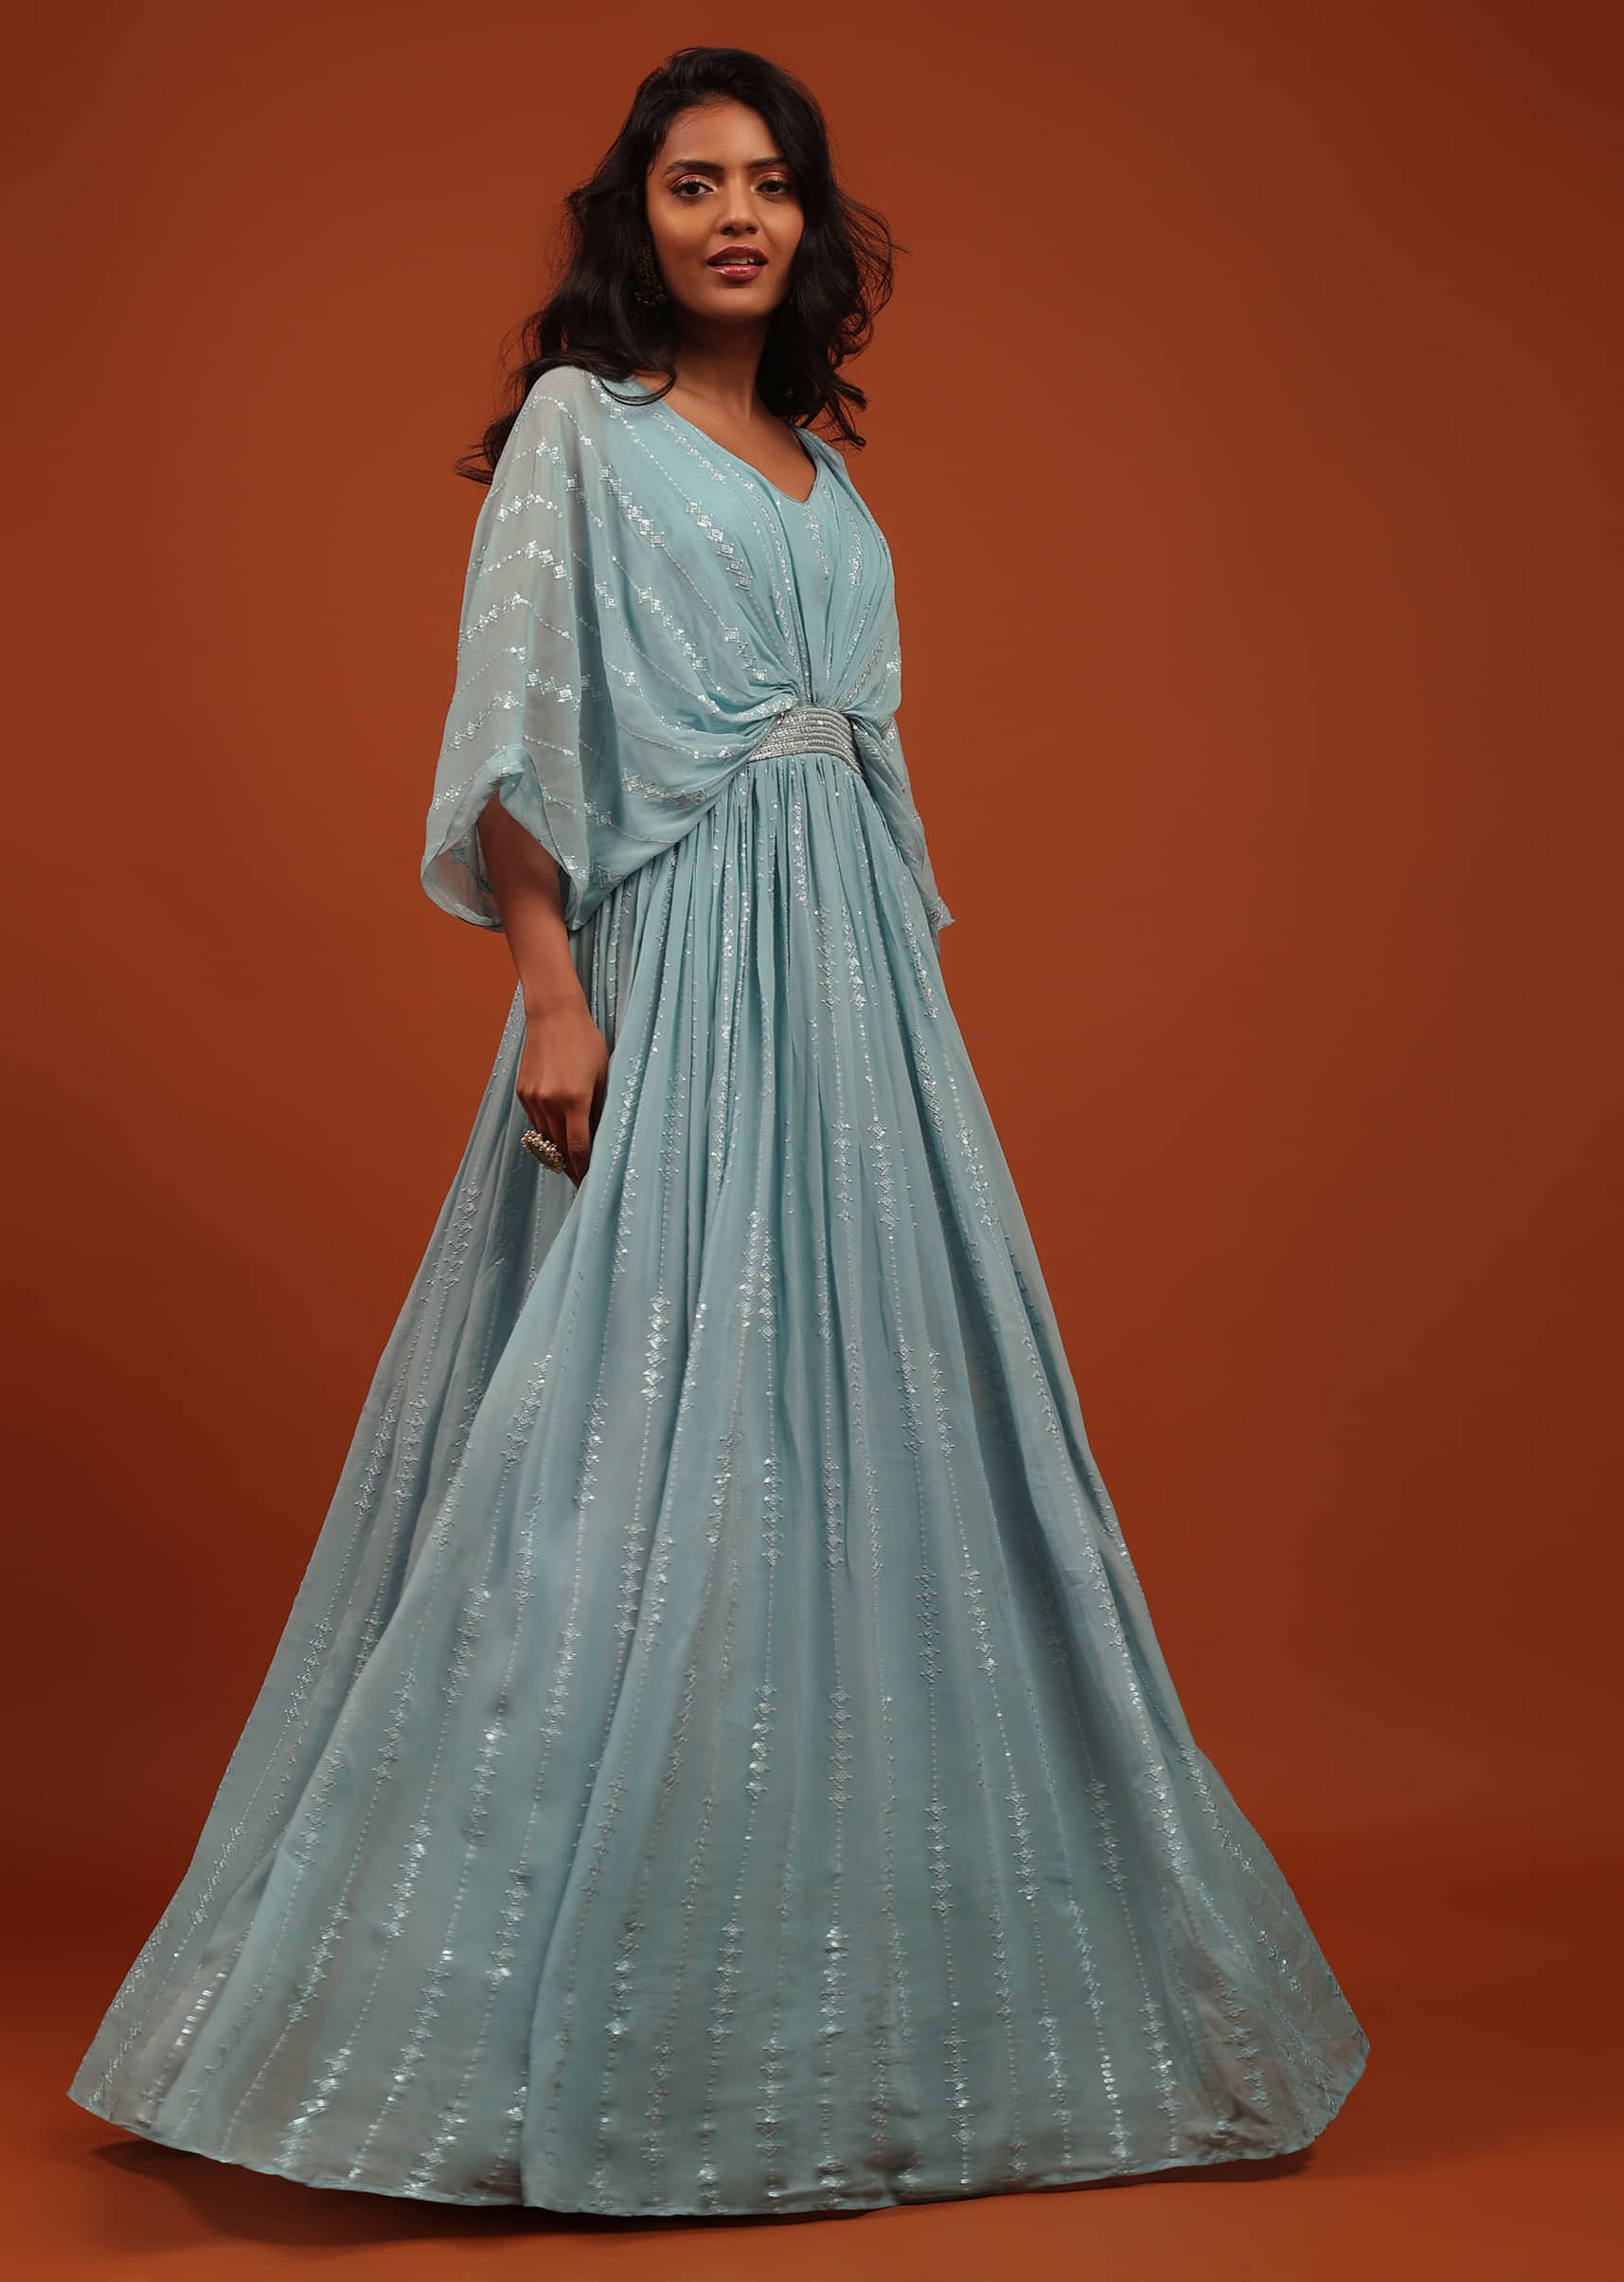 Aquatic Blue Thread And Sequins Embroidered Georgette Kaftan Gown